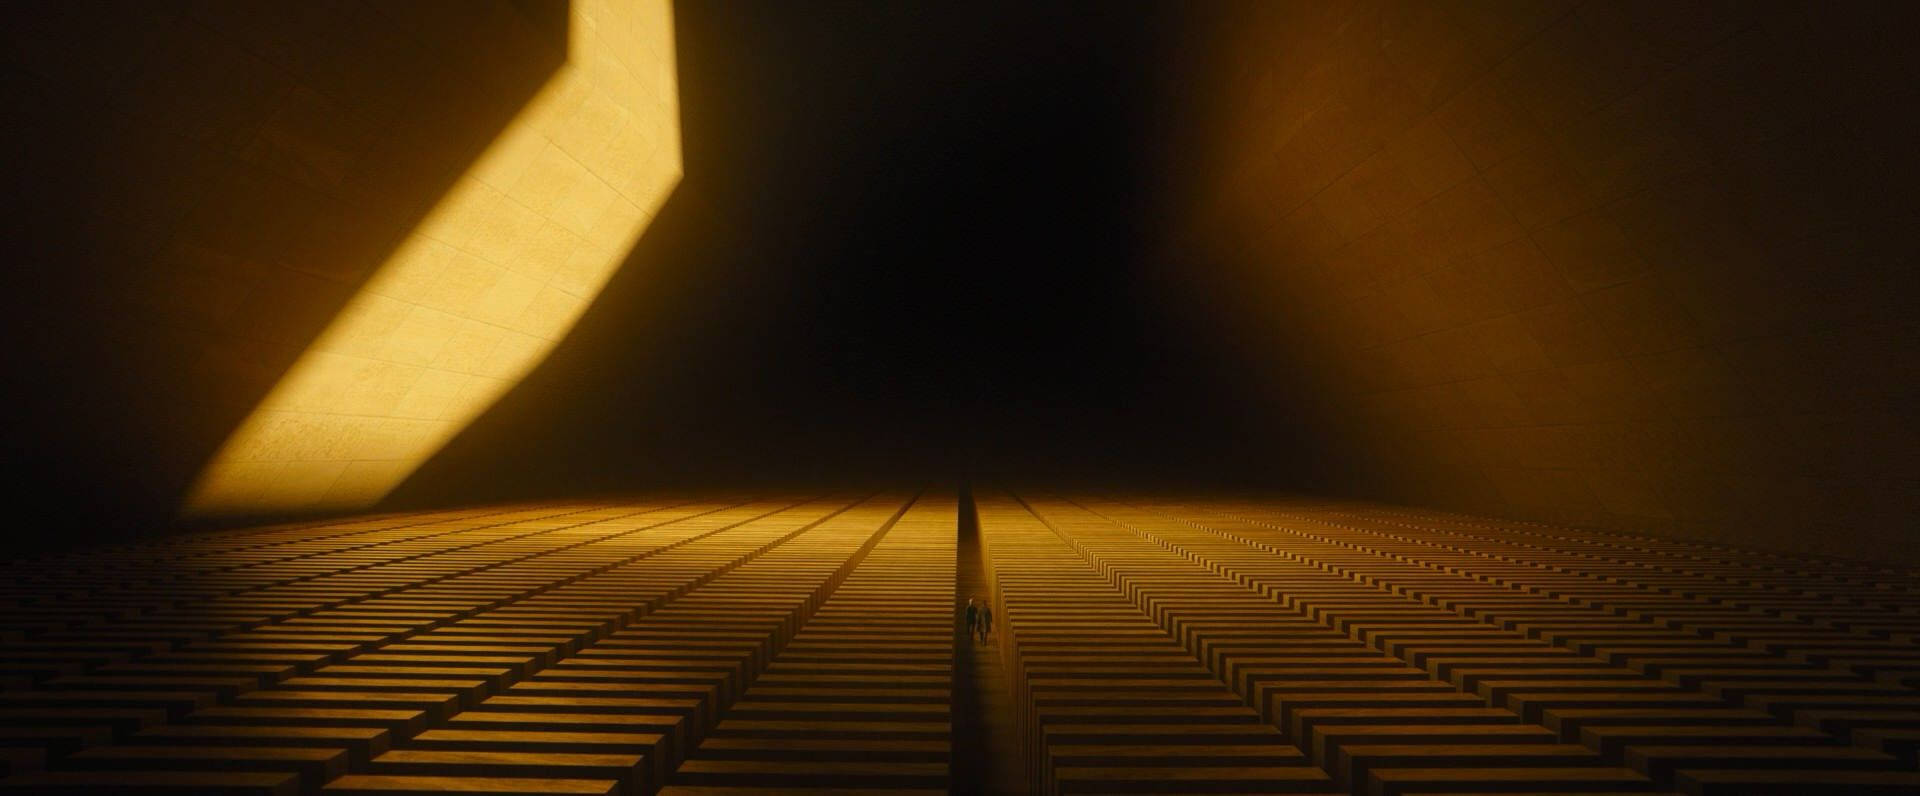 Blade Runner 2049 Rows Of Archives